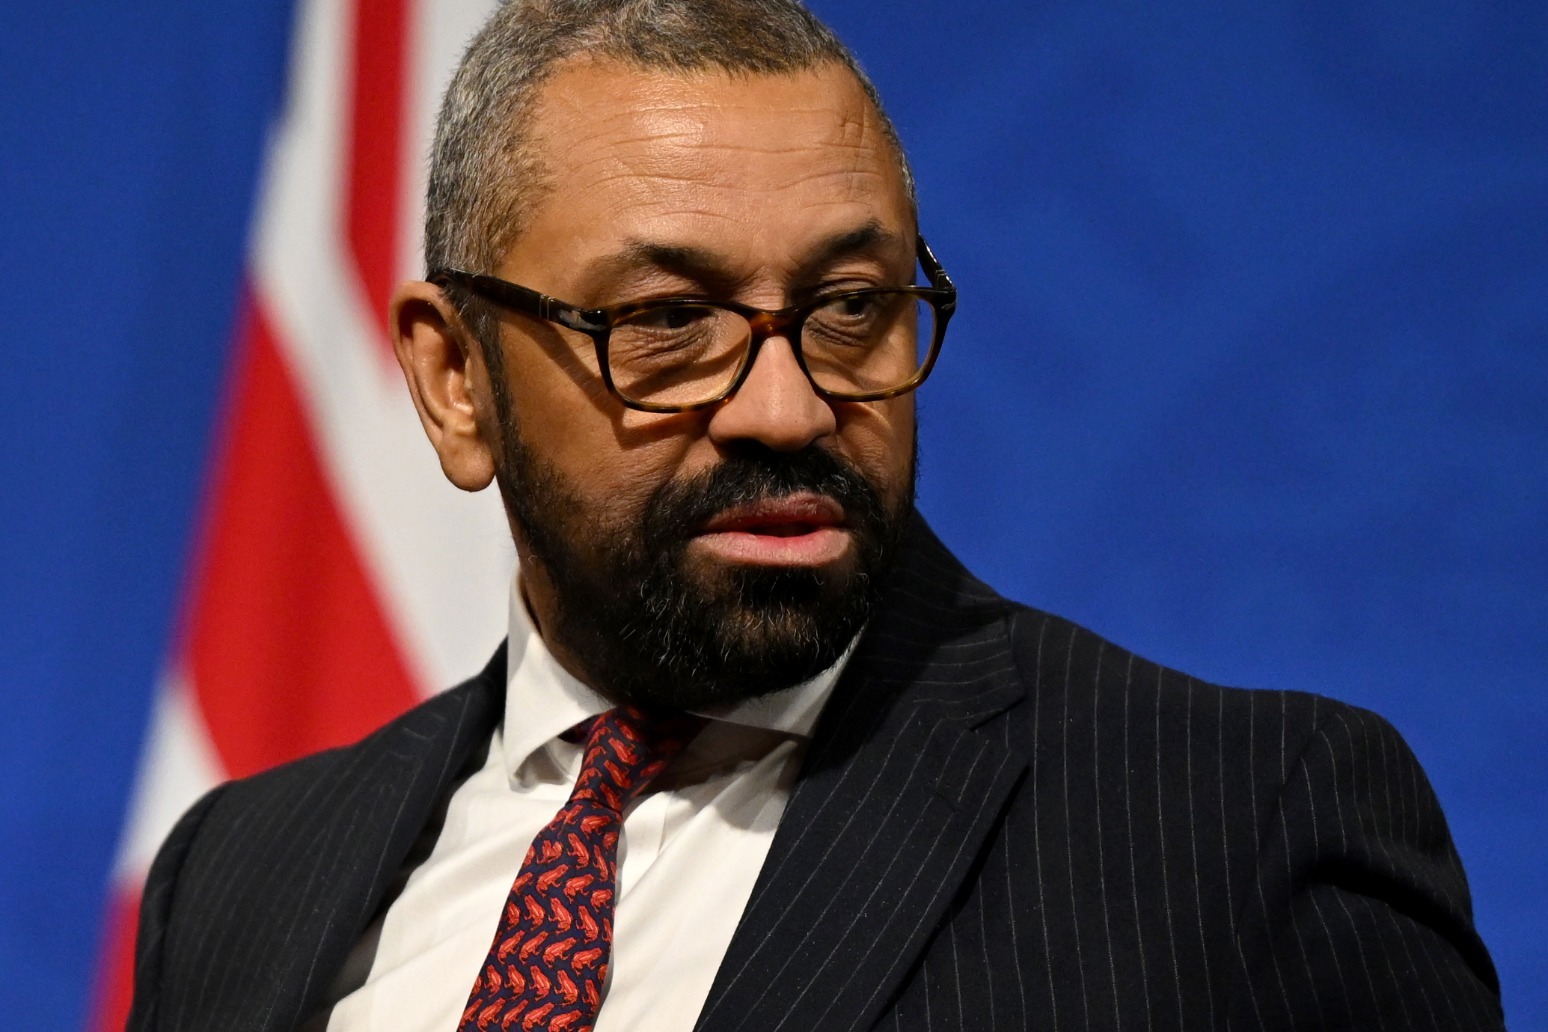 Rwanda plan ‘not the be all and end all’, says James Cleverly 